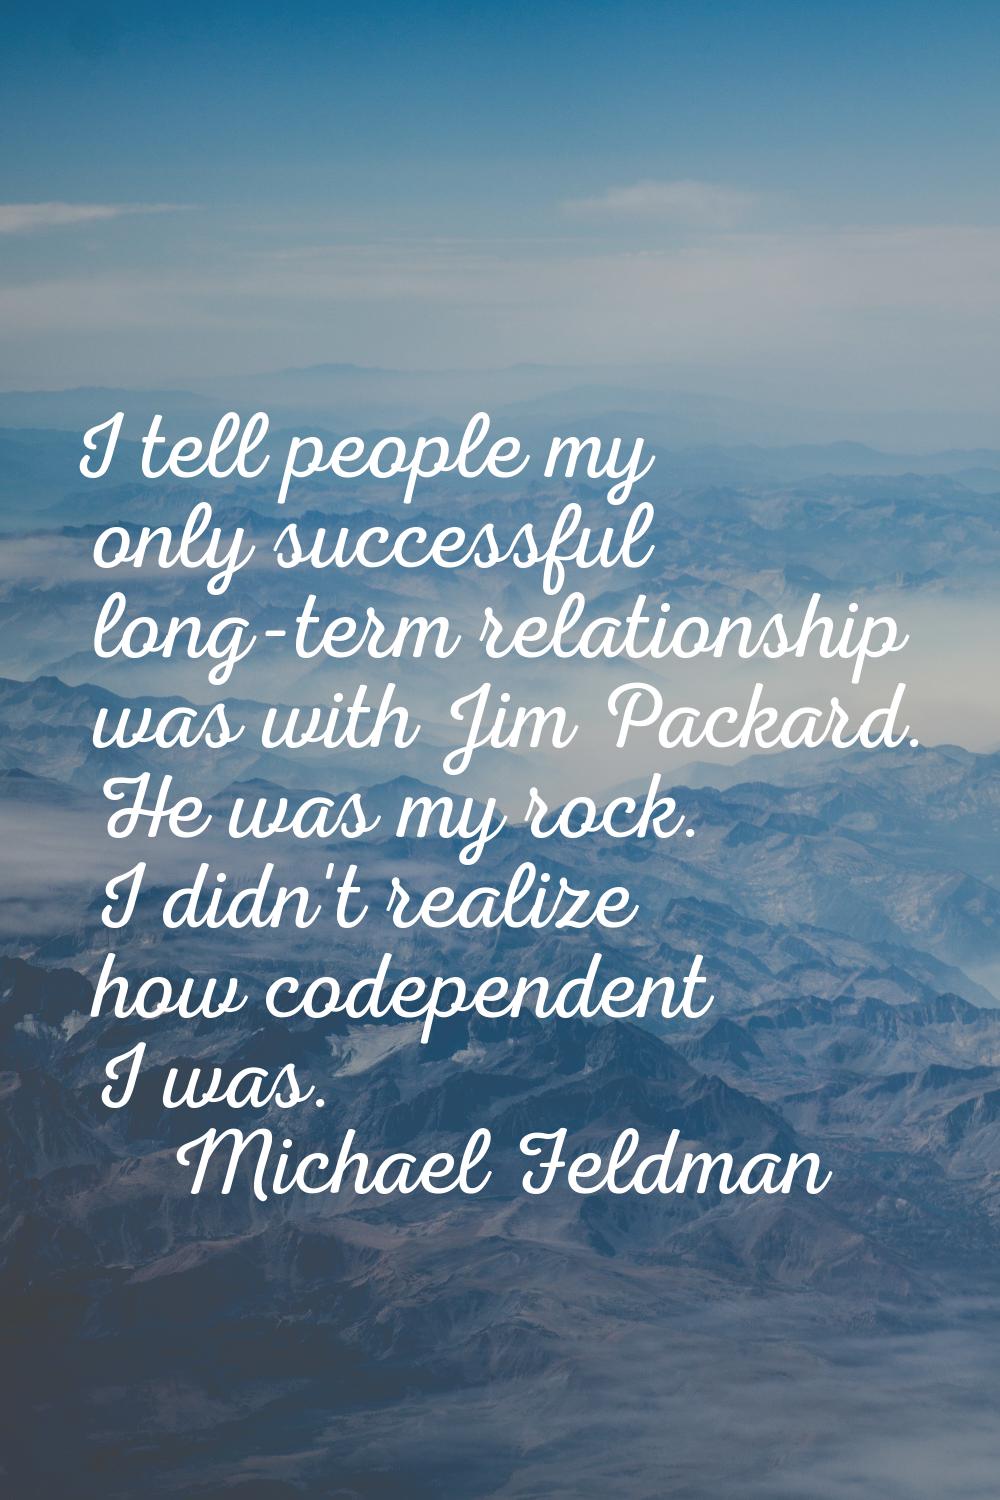 I tell people my only successful long-term relationship was with Jim Packard. He was my rock. I did